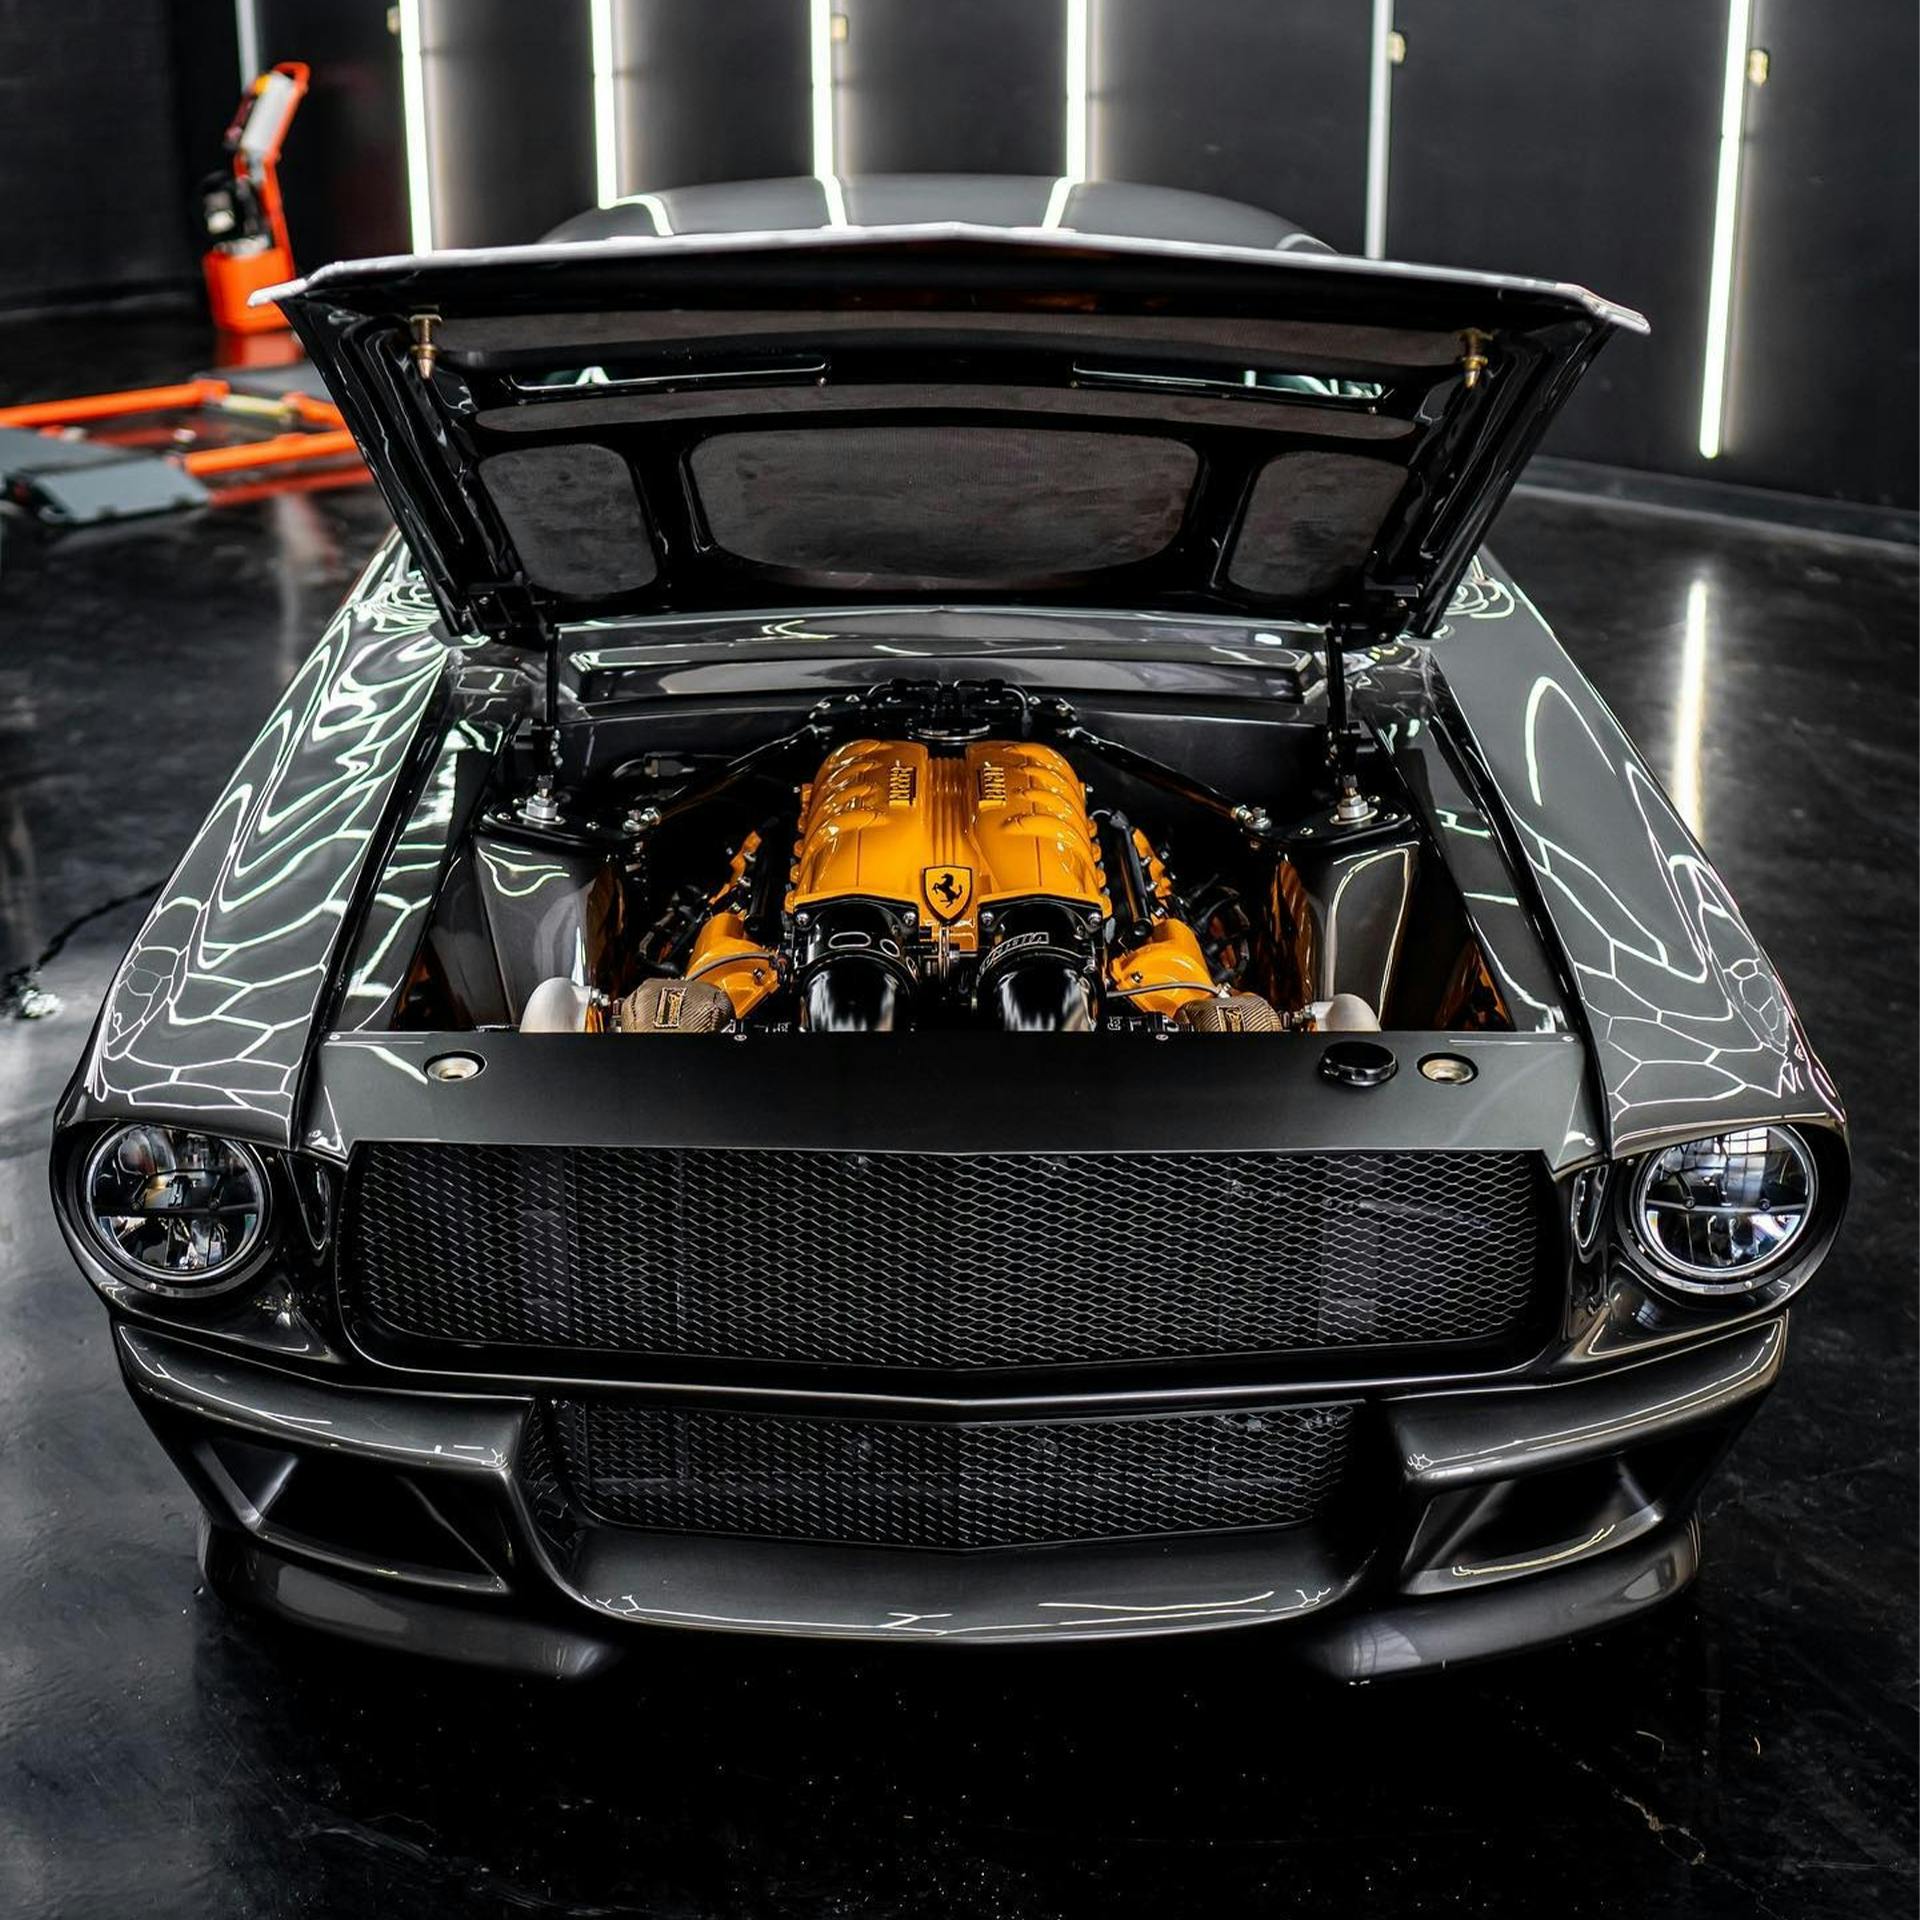 Ford Mustang powered by a 4.3L Twin-Turbocharged Ferrari V8 engine